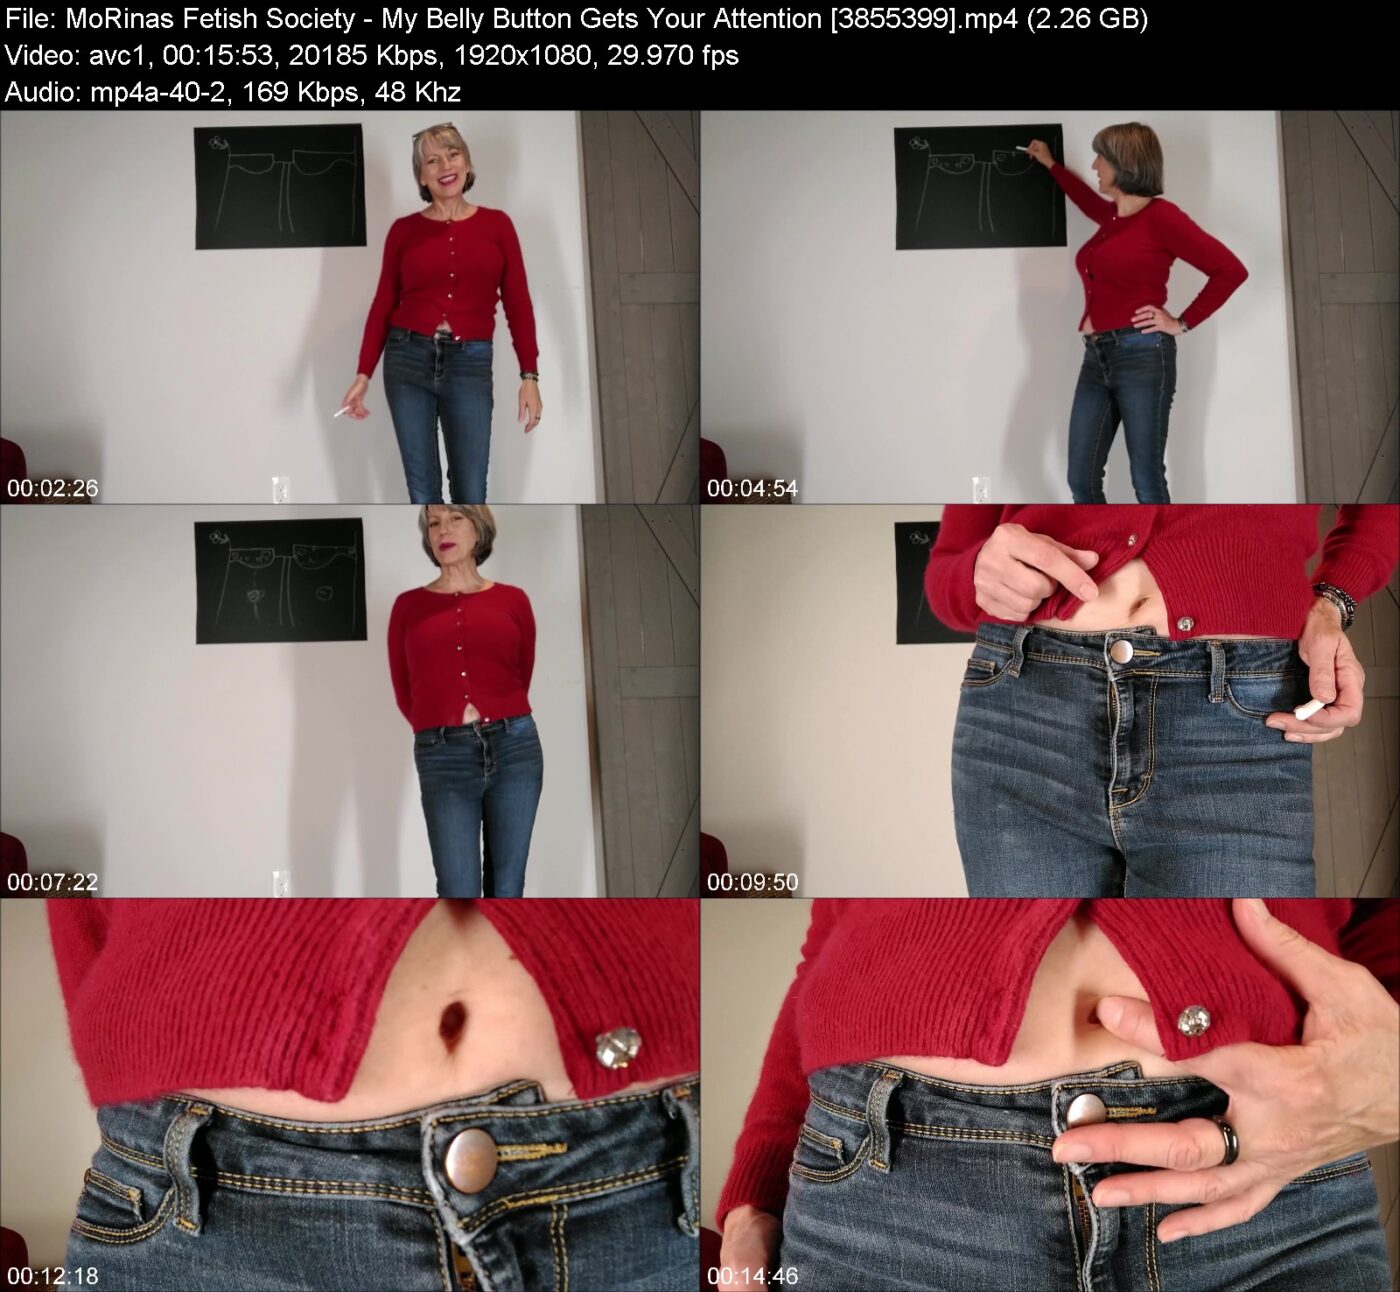 Actress: MoRinas Fetish Society. Title and Studio: My Belly Button Gets Your Attention [3855399]